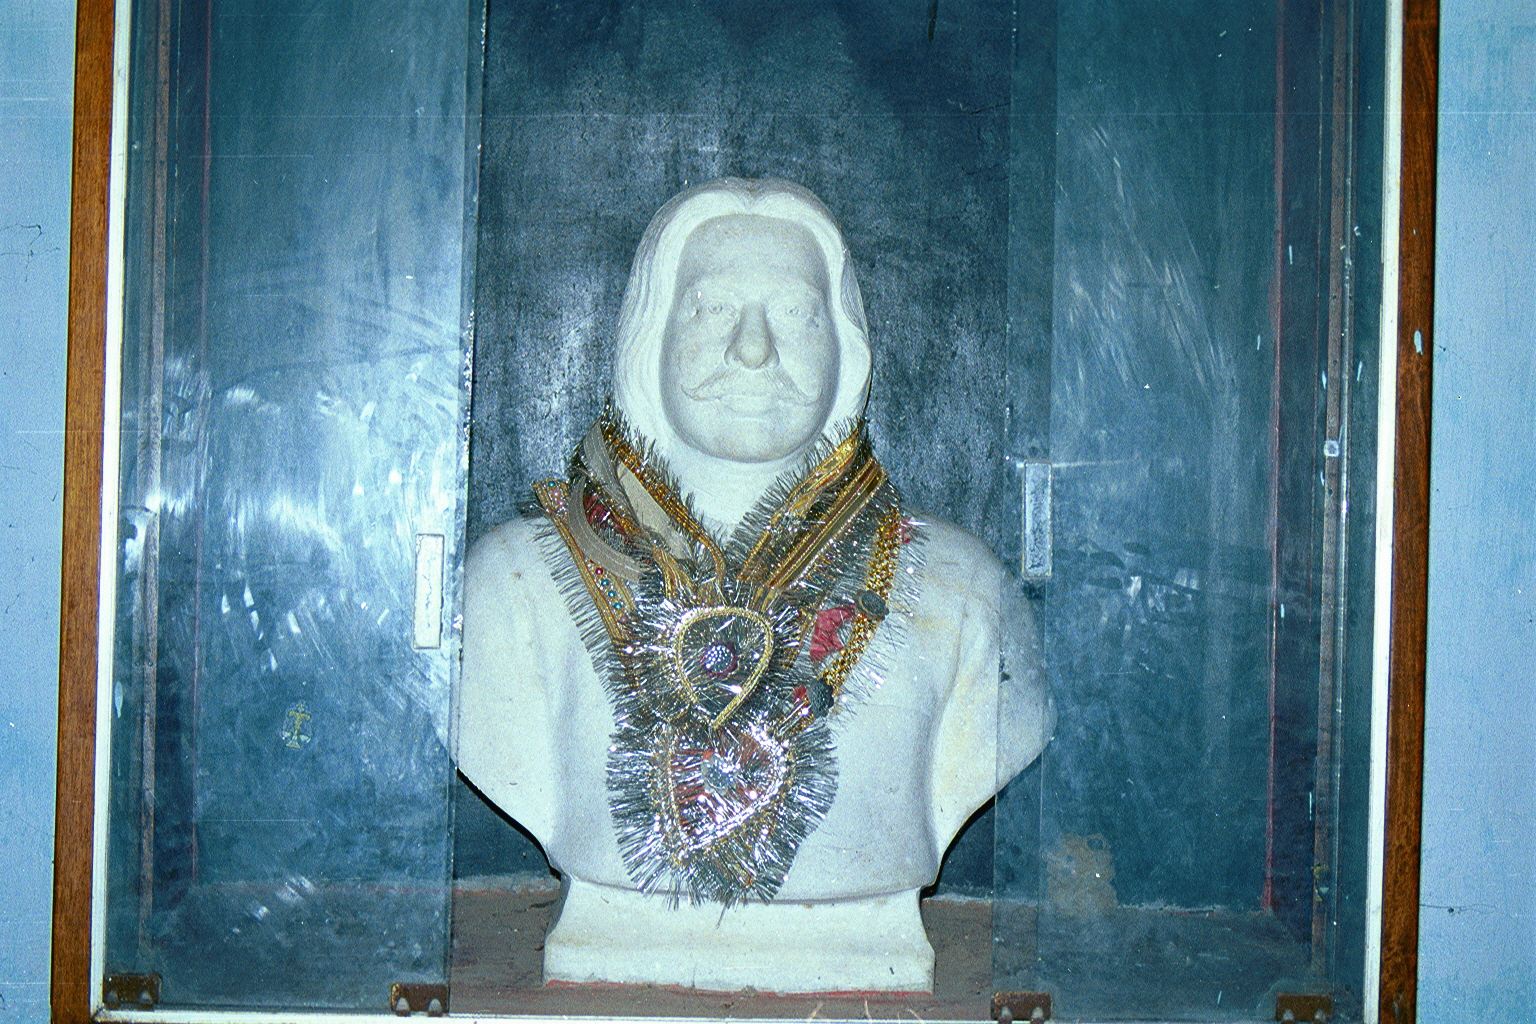 CLICK TO ENLARGE - A marble bust (statue) of my Late Great Grandfather Mr J. P. Chaturvedi, at the 'Mallehpur' railway station. The entire station, including the railway yard was built on our property in the 1920's at 'Mallehpur', Monghyr(District), BIHAR, North India